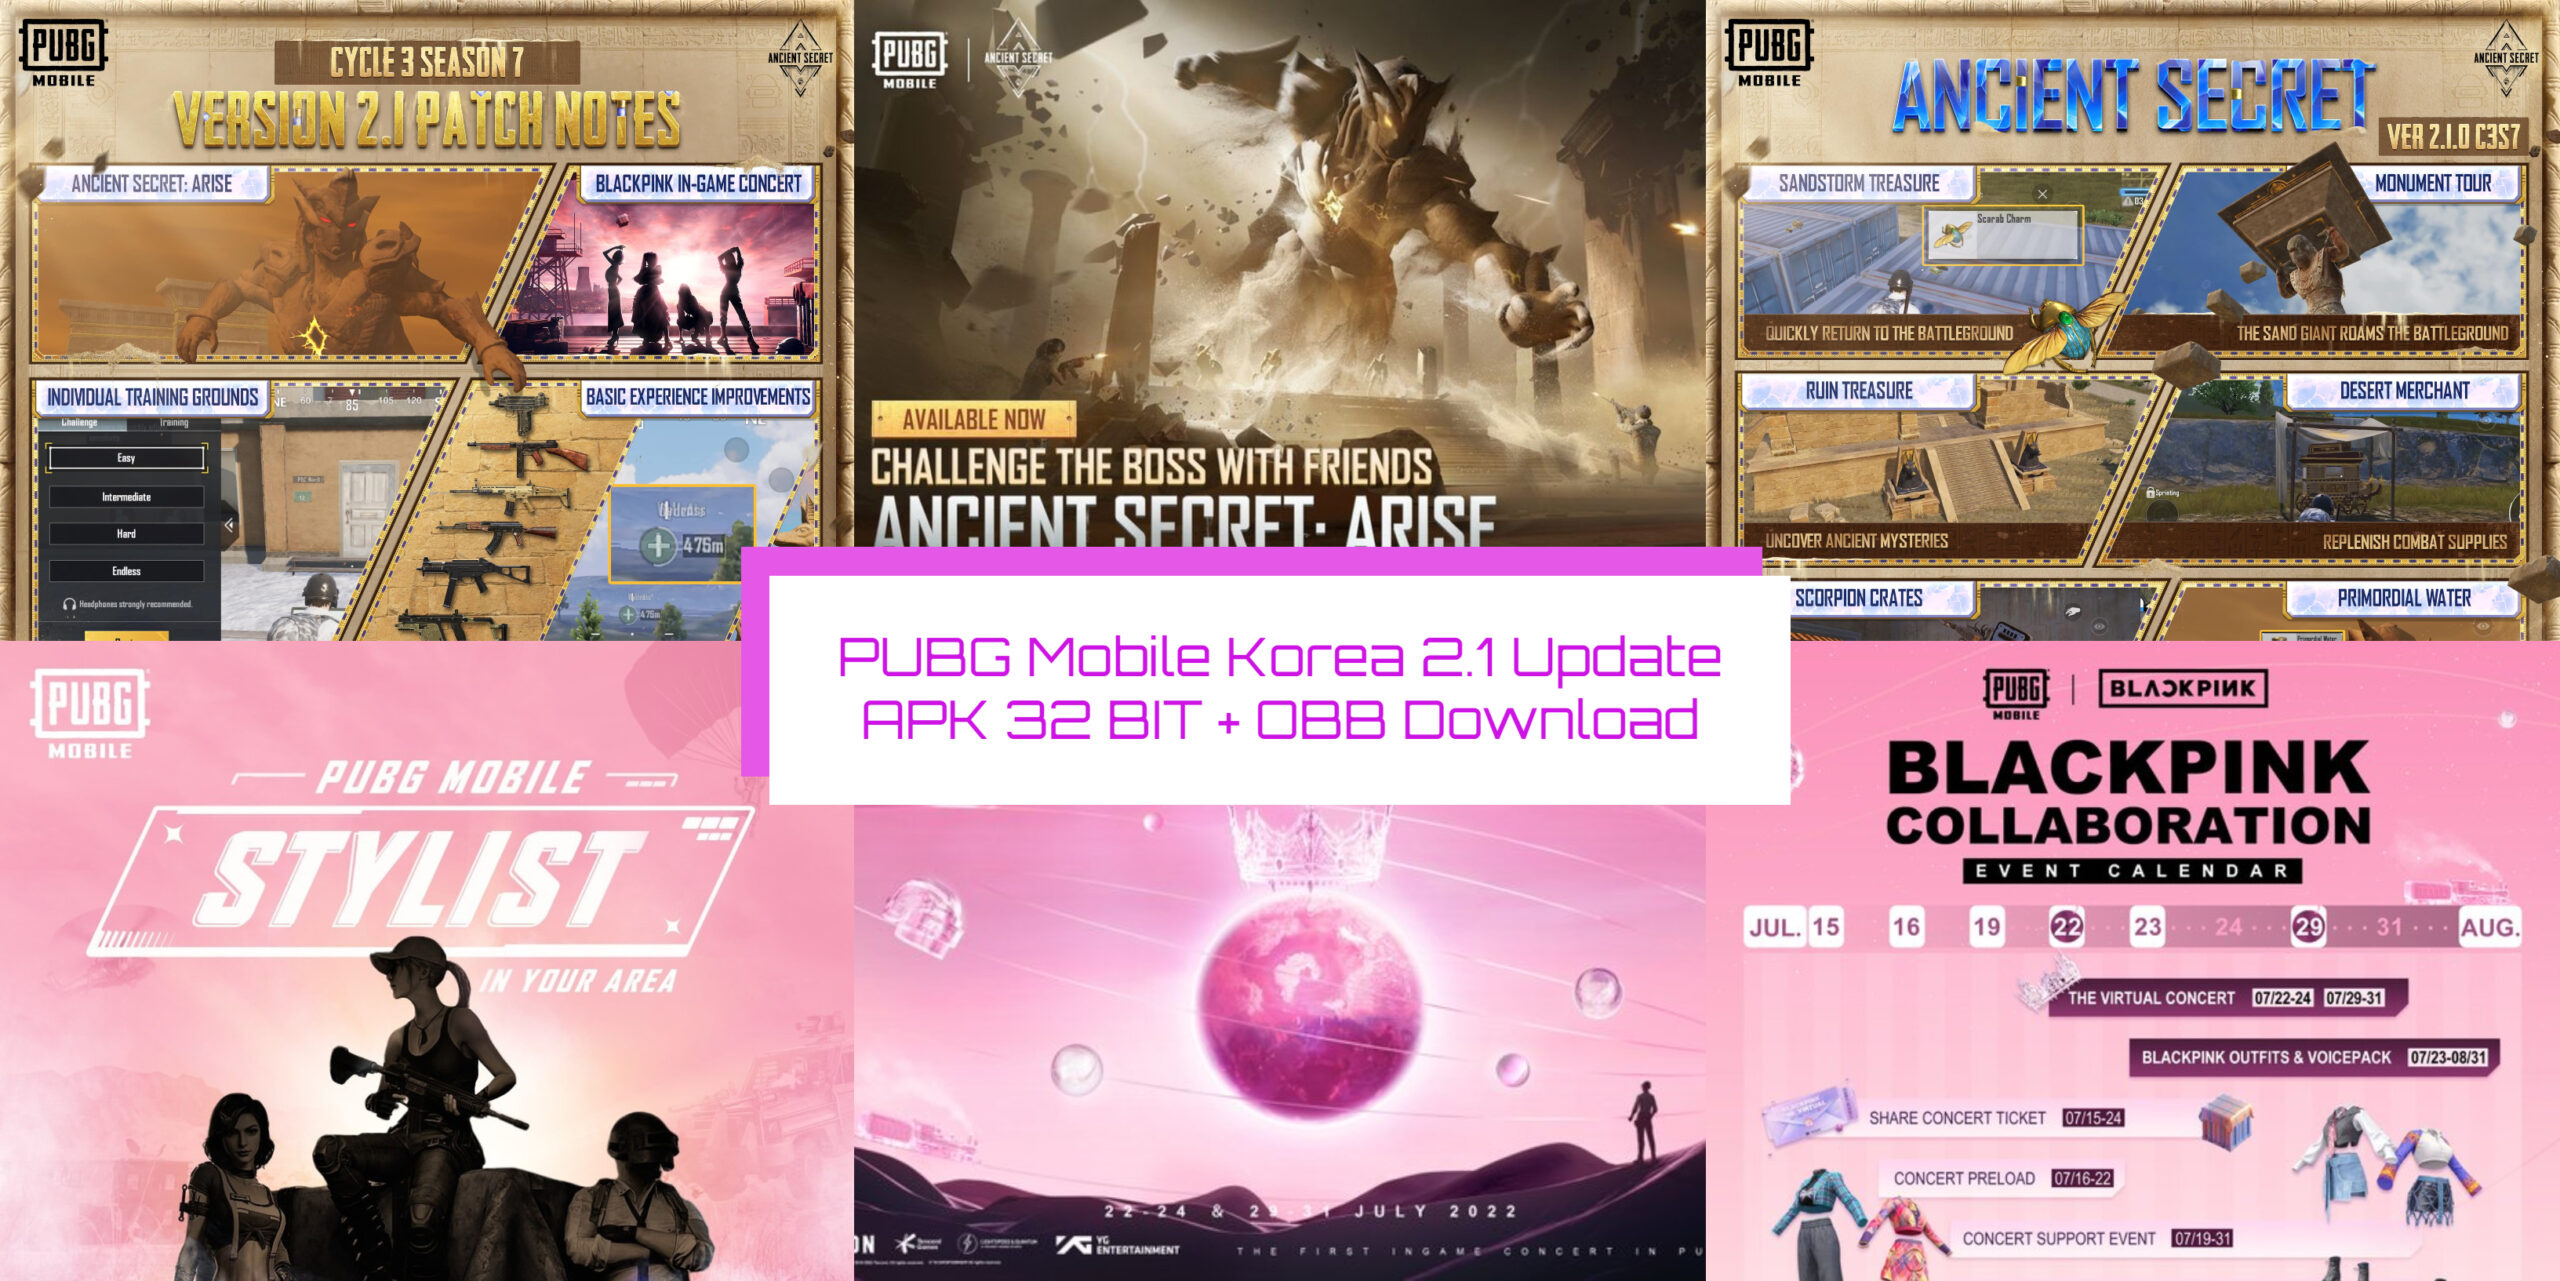 You are currently viewing PUBG Mobile KR 2.1.0 Update APK 32 BIT + OBB Download